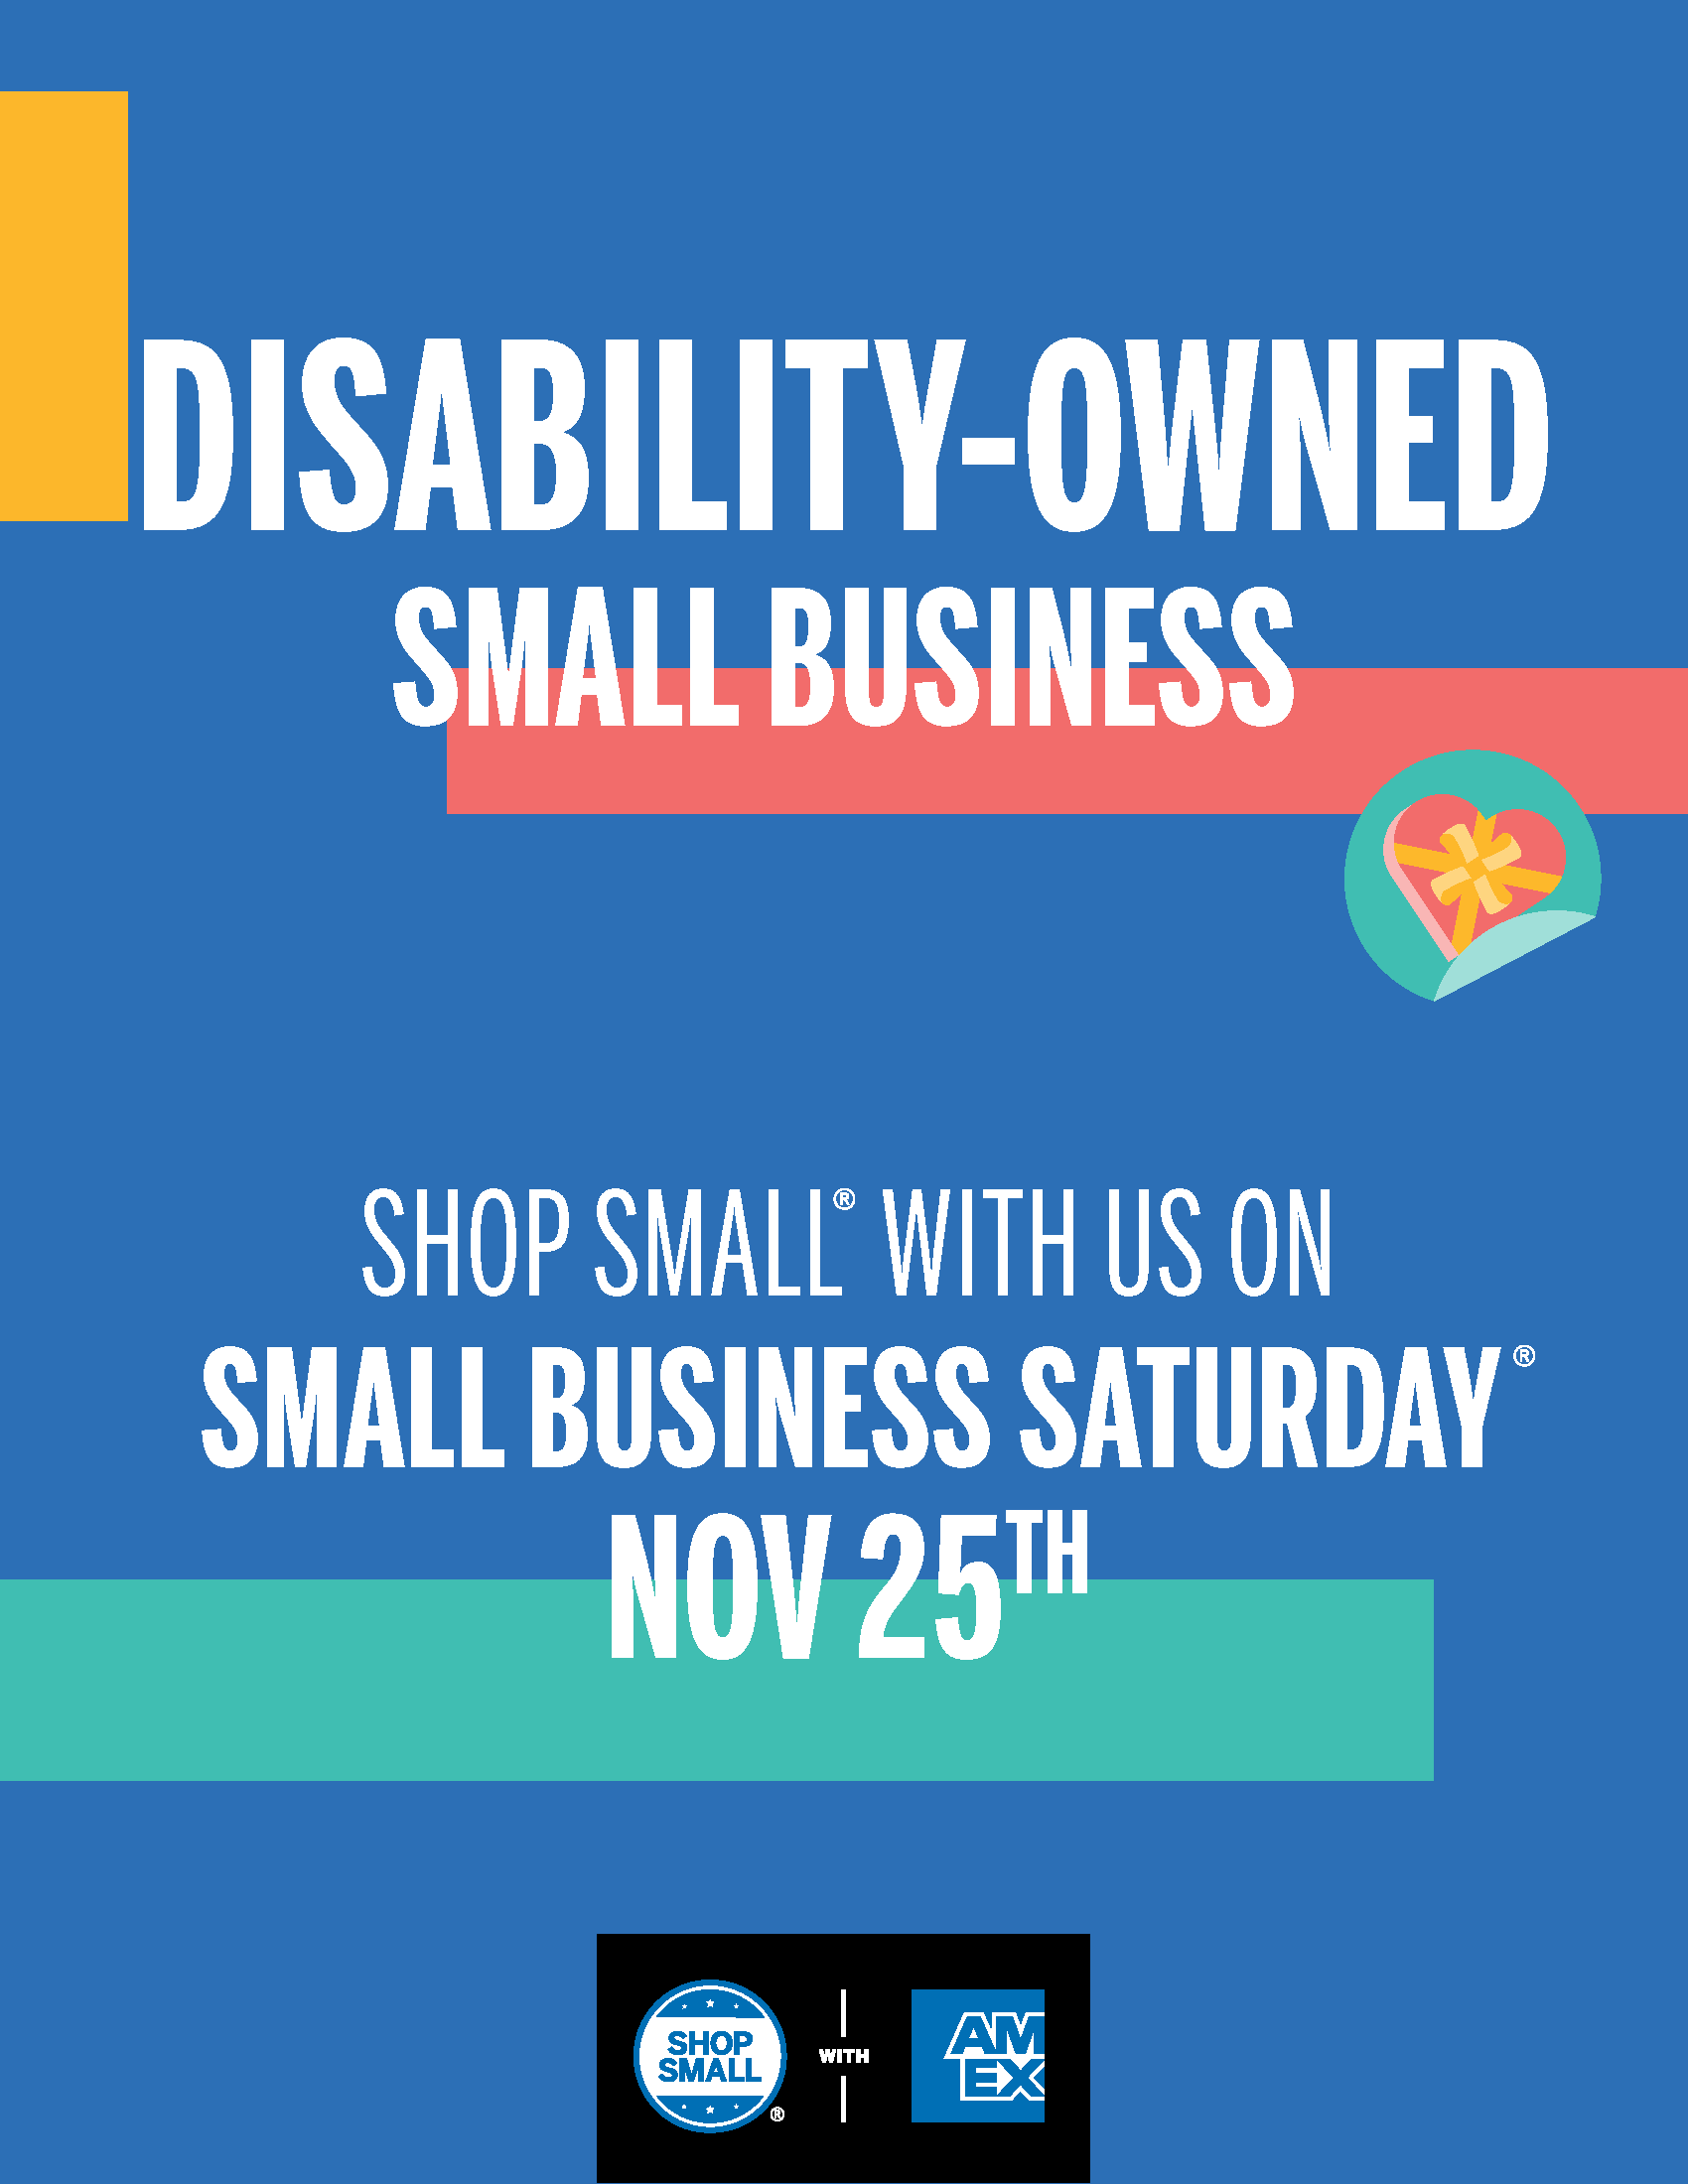 Thumbnail image of Poster PDF that reads Disability-Owned Small Business; Shop Small with us on Small Business Saturday Nov 25th and includes the Shop Small with Amex logo